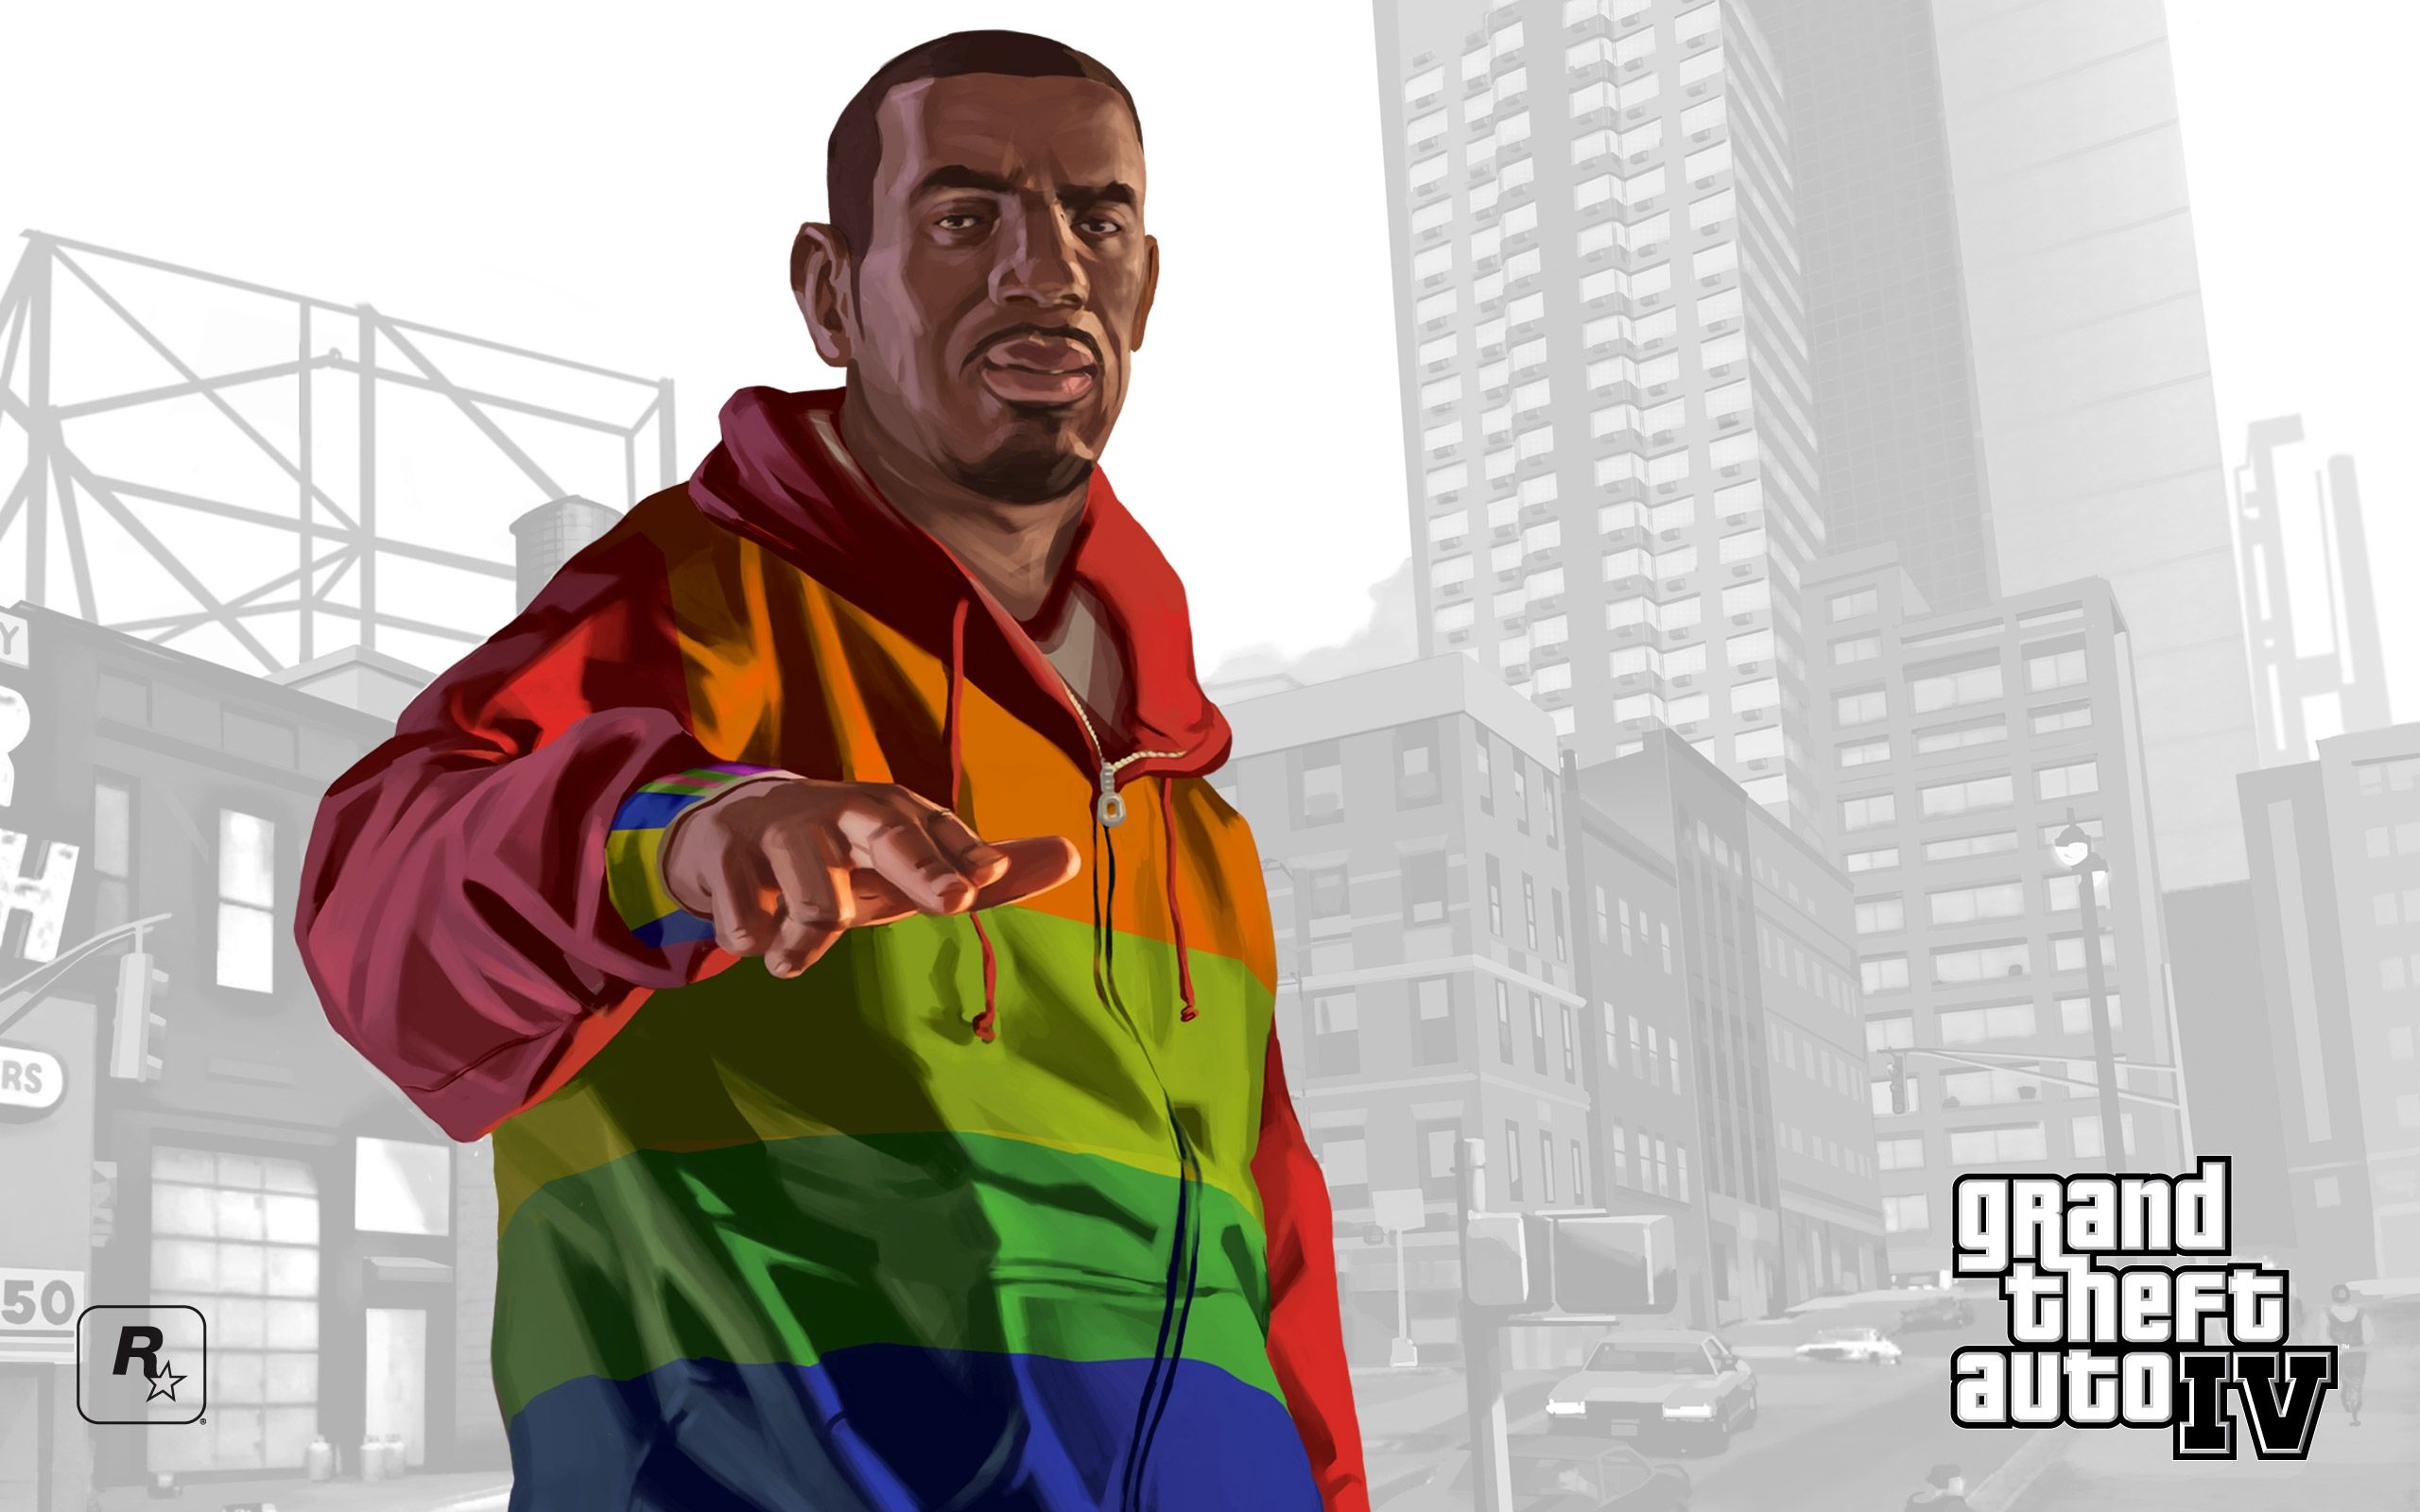 Wallpaper, illustration, T shirt, cool, fun, professional, fictional character, product, outerwear, grand theft auto gta playboy x 2560x1600